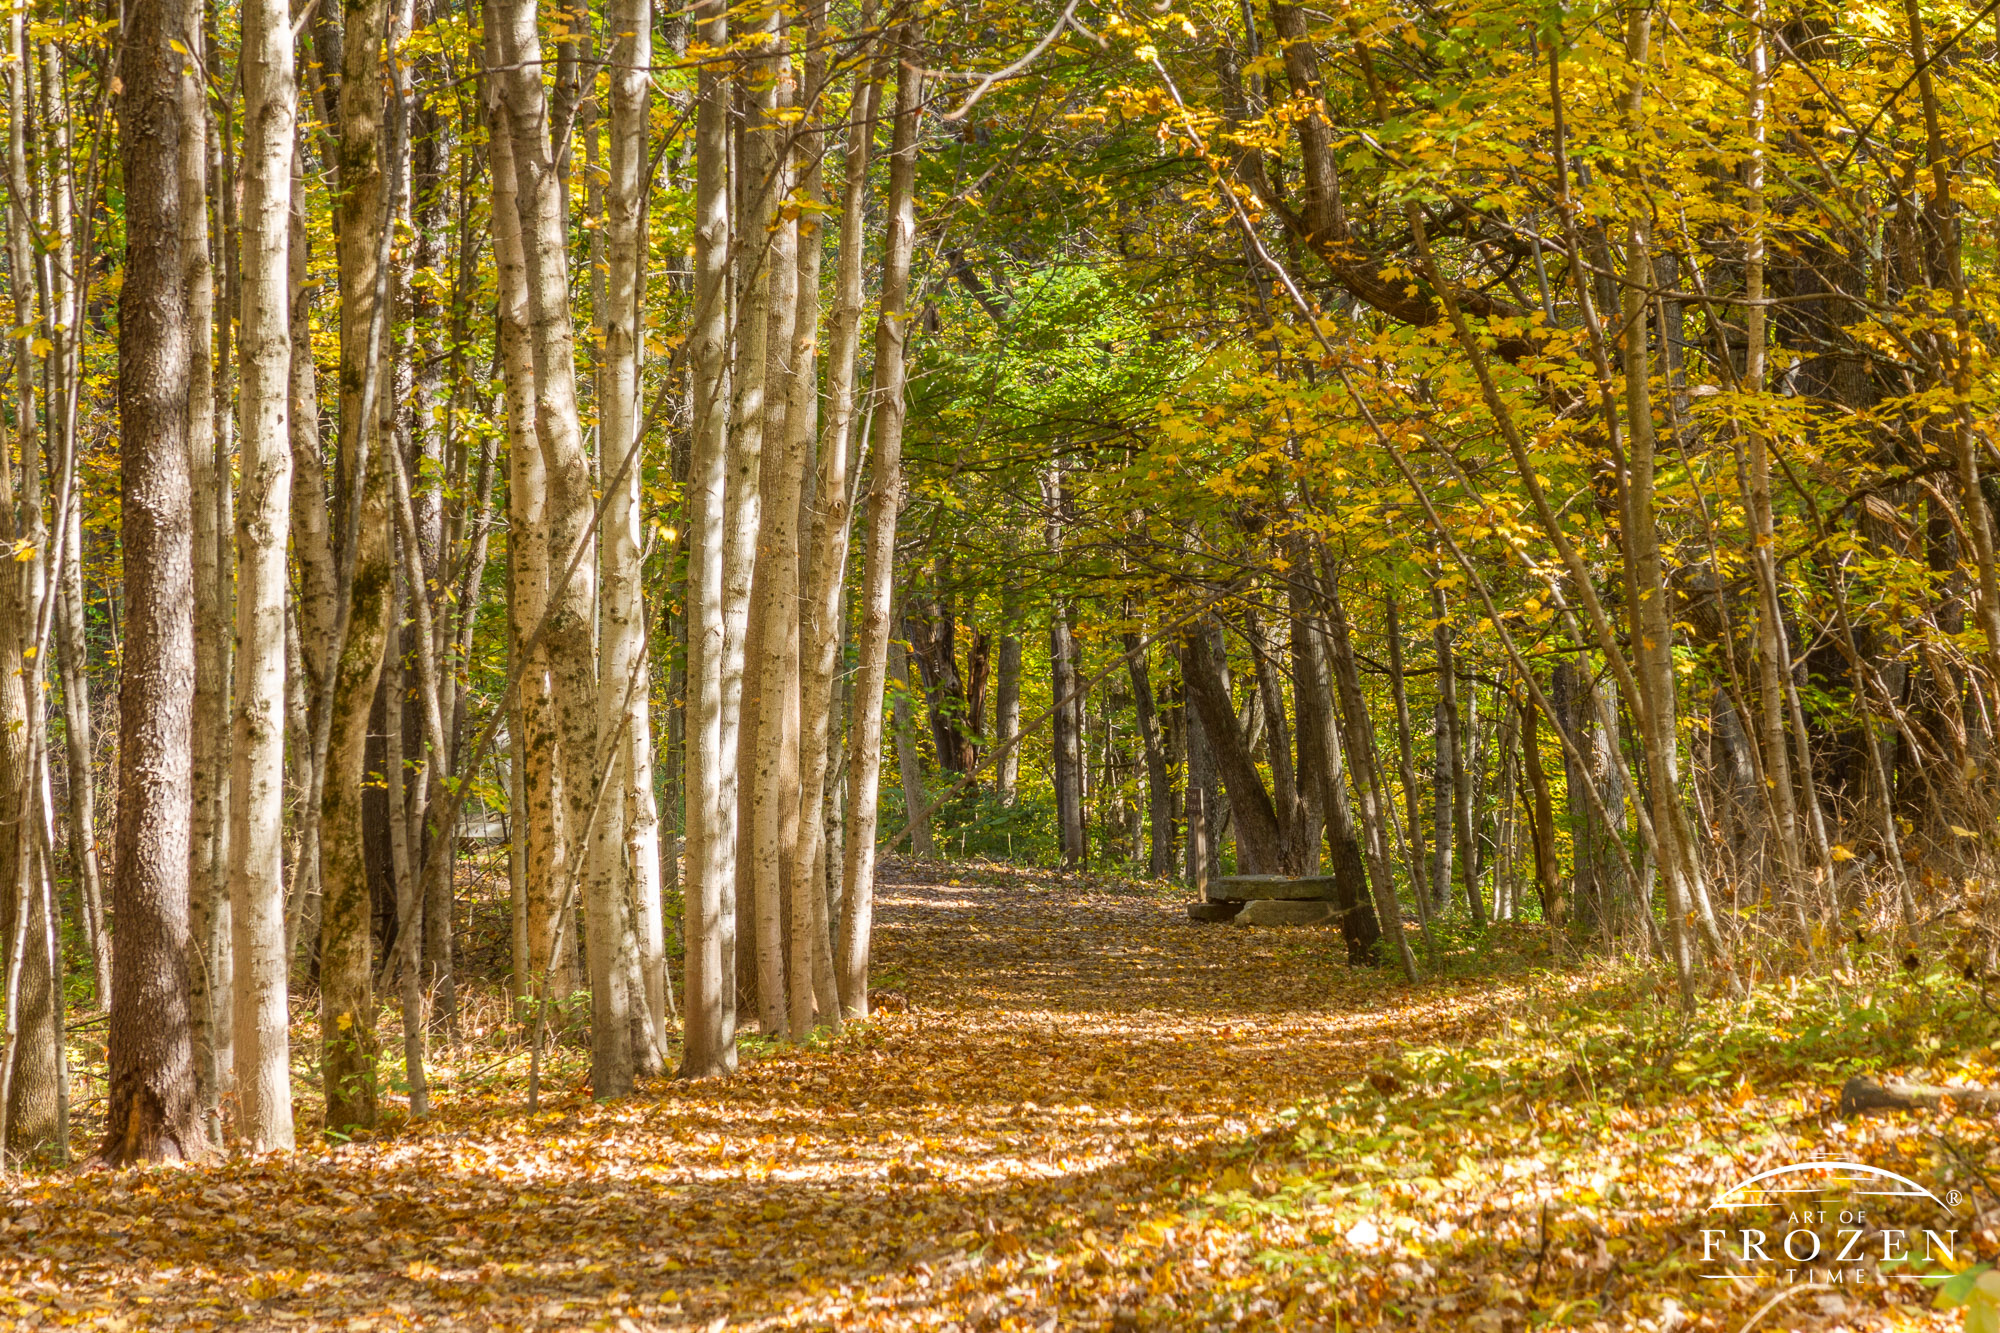 A trail leads visitors around a stand of birch trees in Sugarcreek MetroPark during a fall day